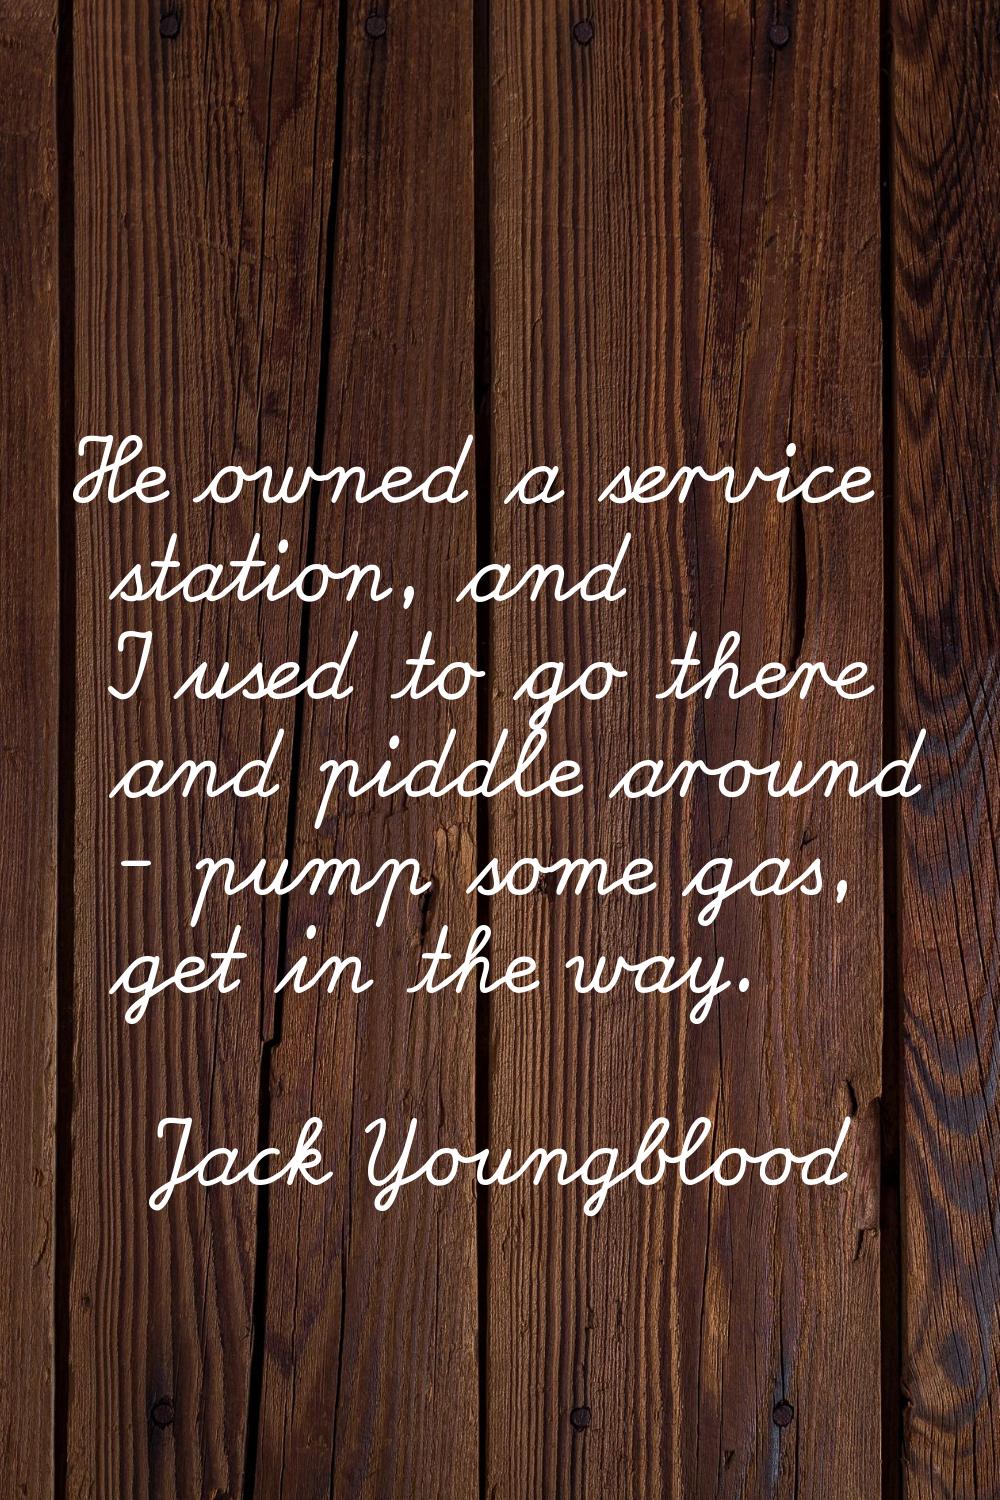 He owned a service station, and I used to go there and piddle around - pump some gas, get in the wa